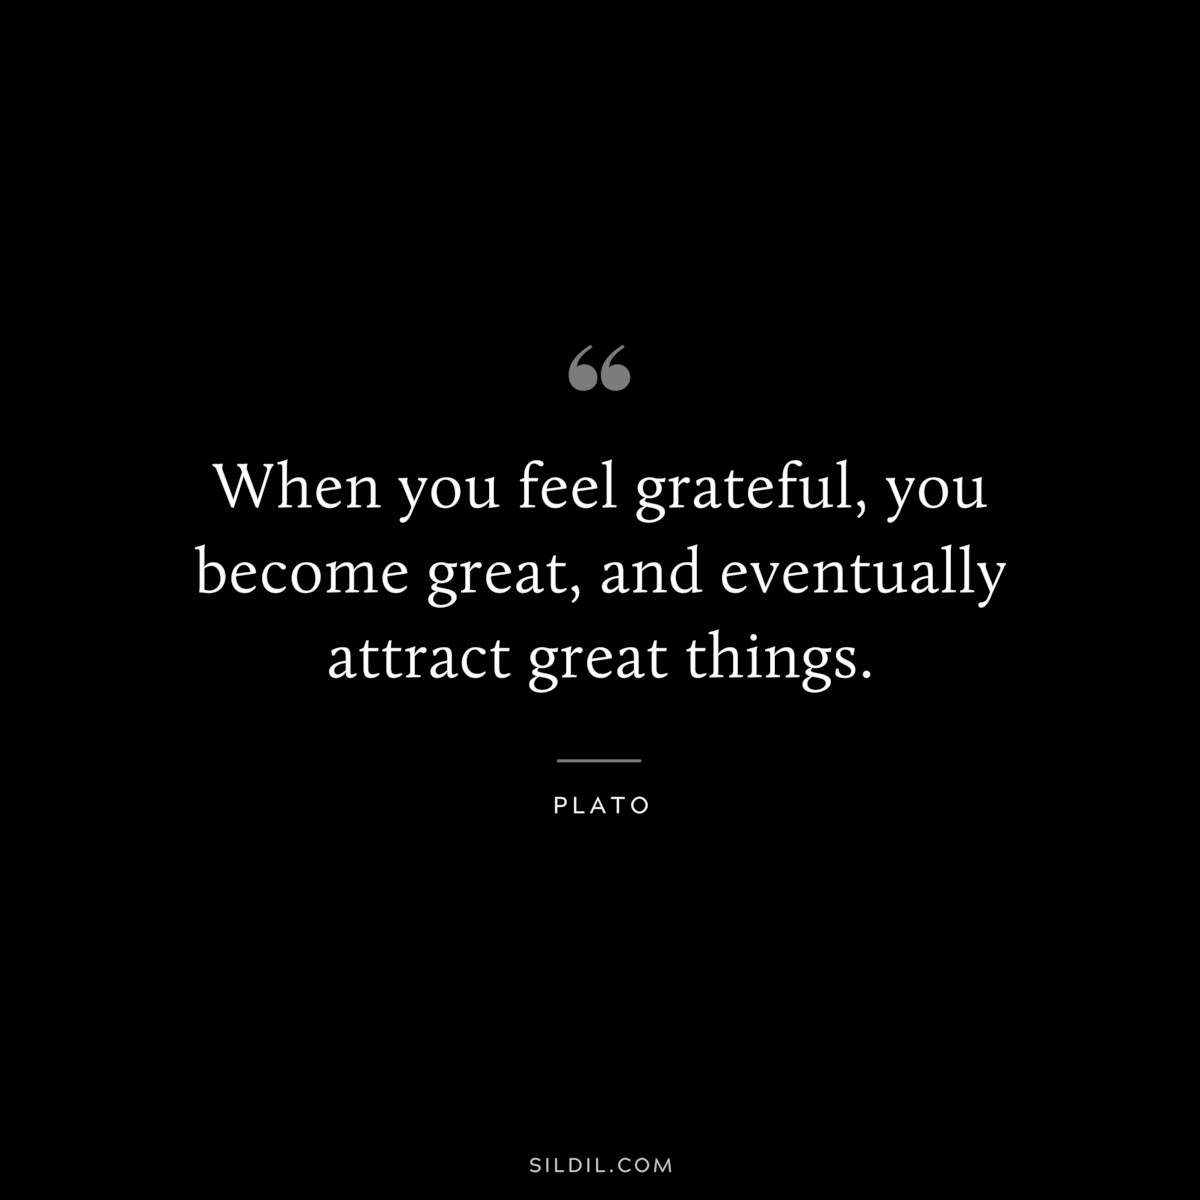 When you feel grateful, you become great, and eventually attract great things. ― Plato